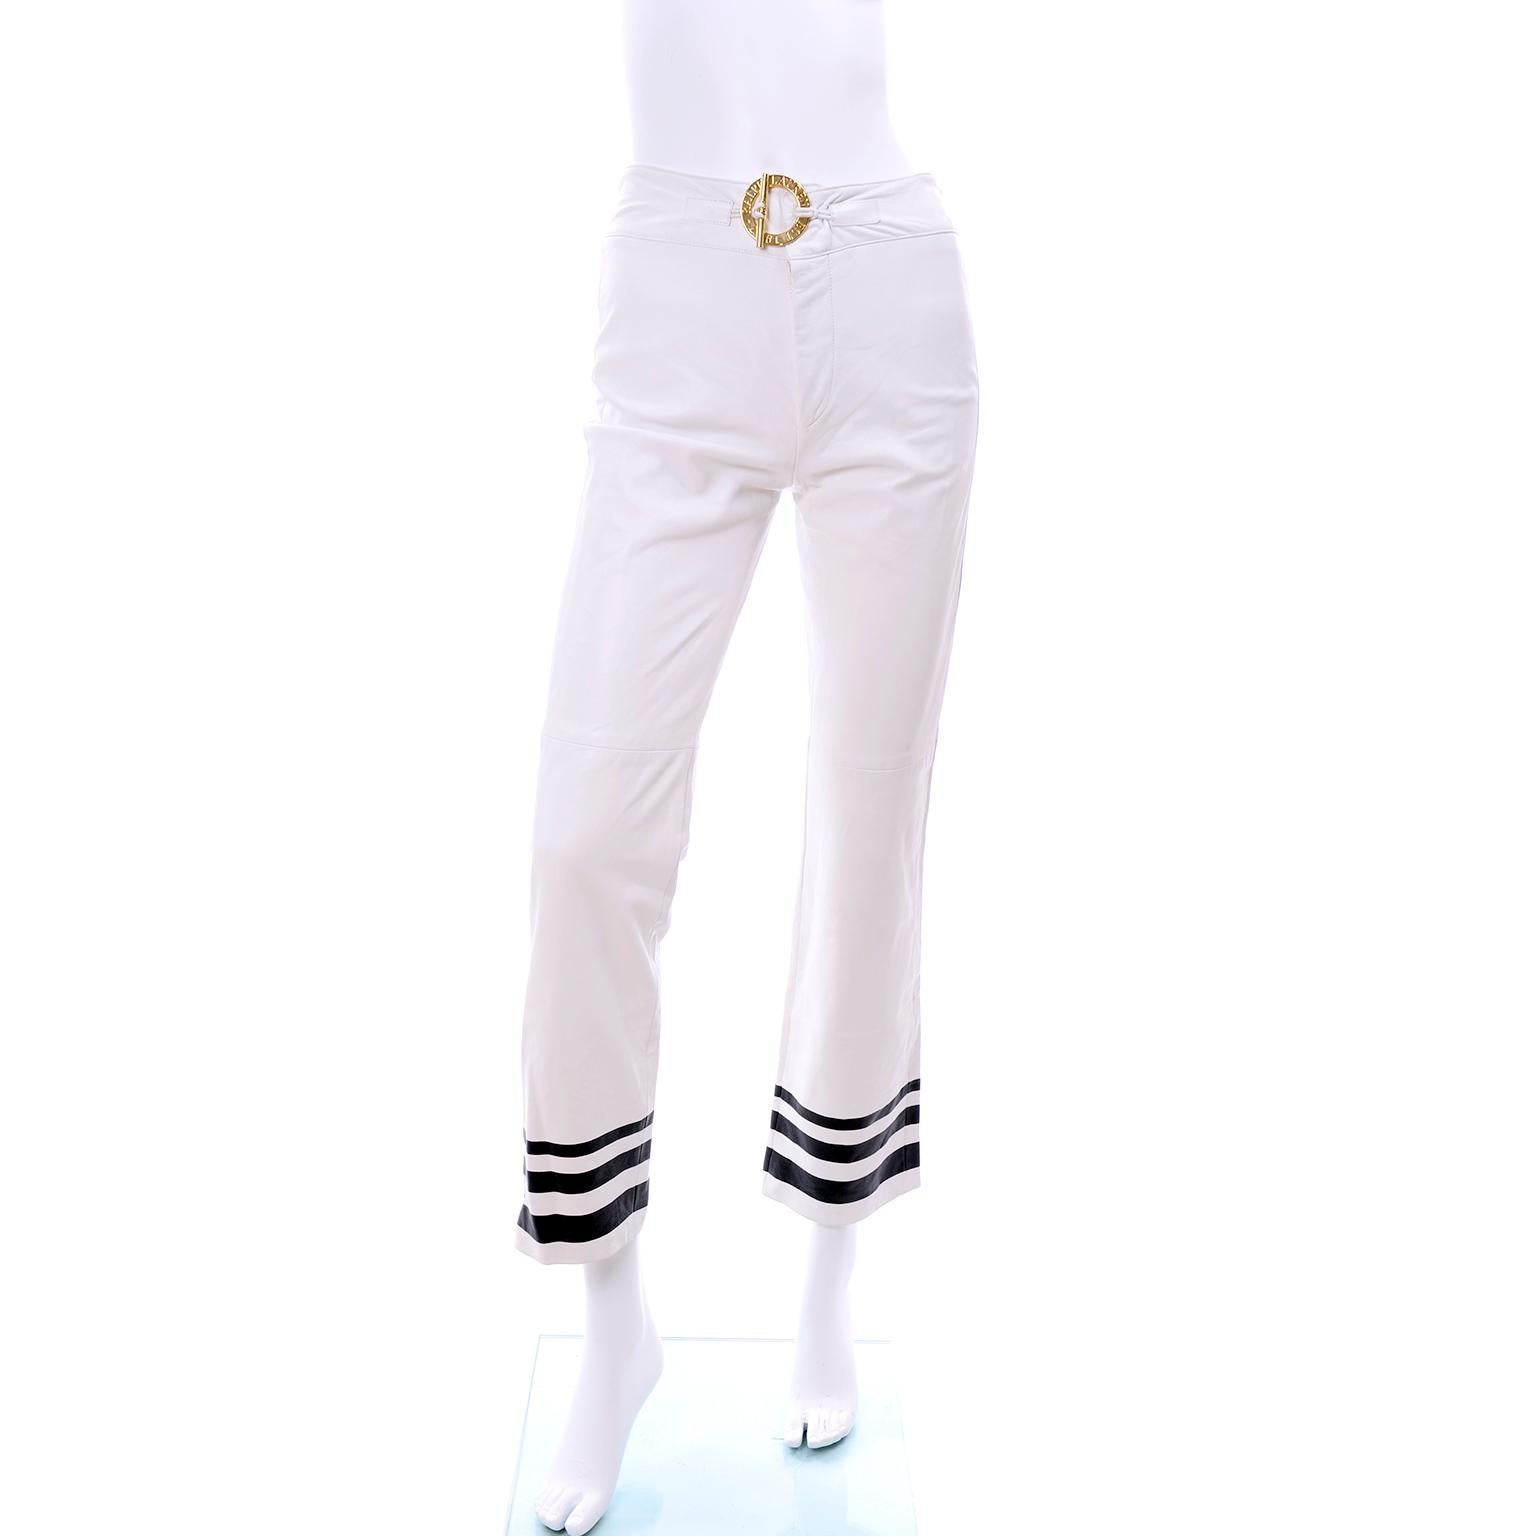 These are new Ralph Lauren white leather pants with the original $1595 price tag attached. These slightly cropped Ralph Lauren fully lined white summer leather pants have nautical inspired navy blue stripes at the hem and a great gold toggle buckle